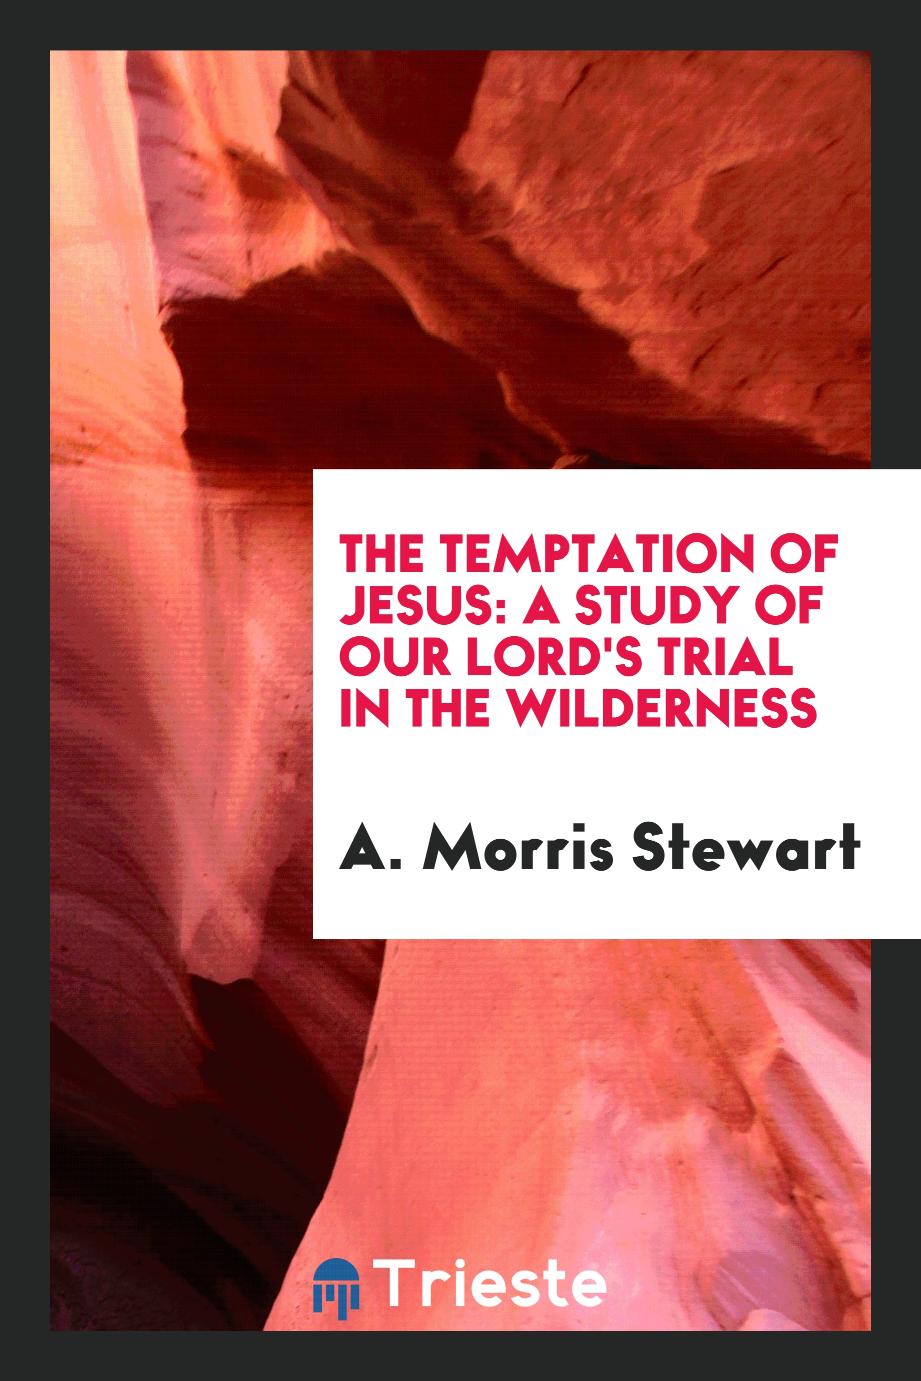 The Temptation of Jesus: A Study of Our Lord's Trial in the Wilderness